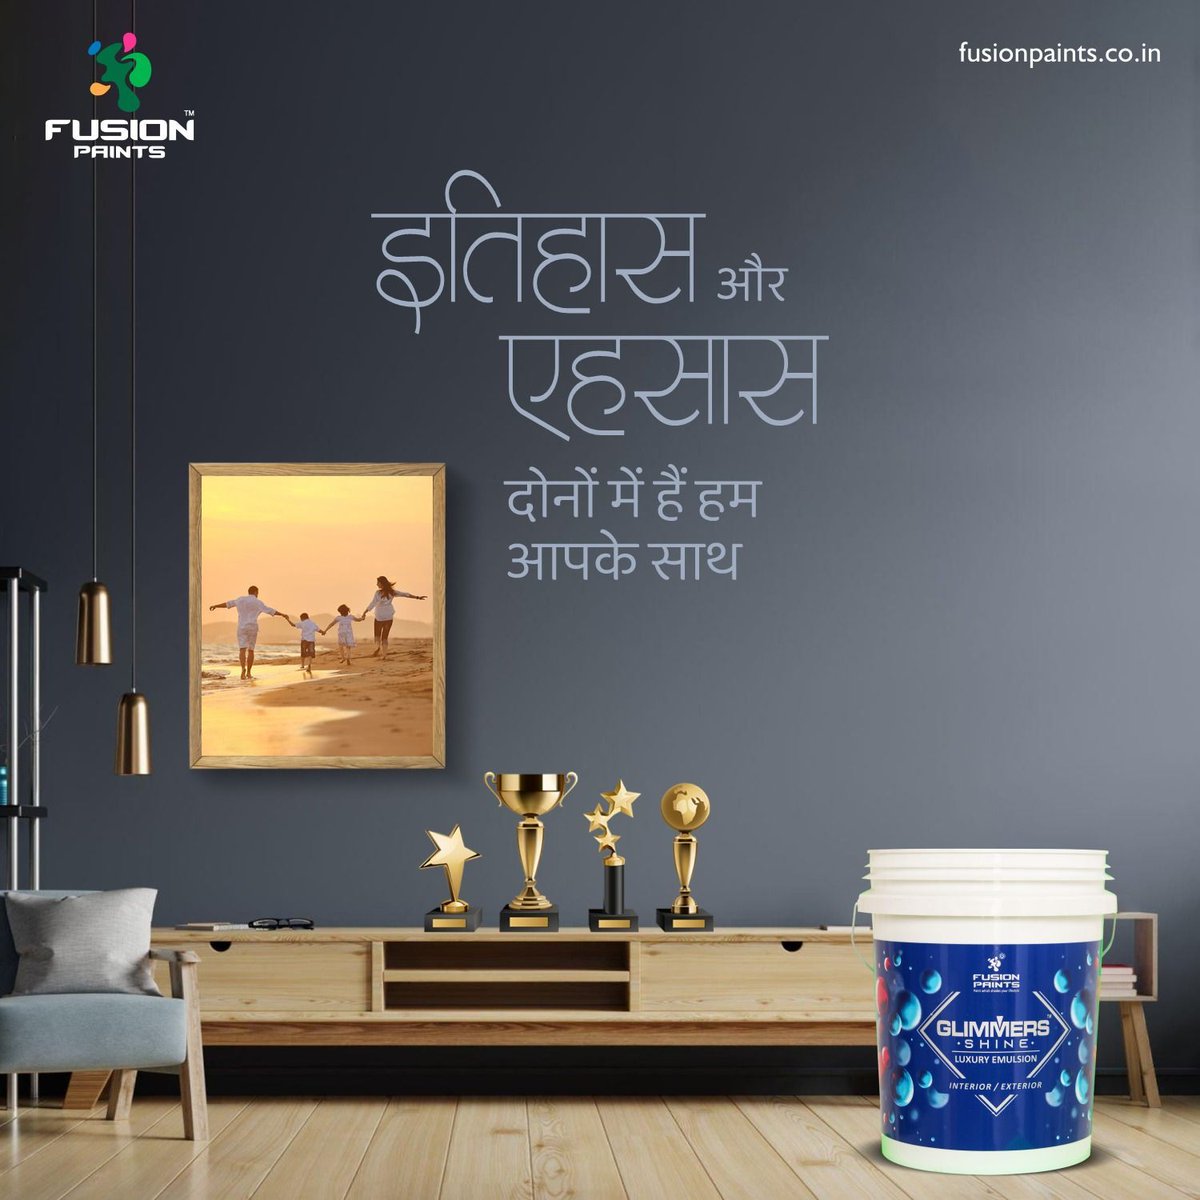 Over the years, these walls have seen success. Fusion Paints takes great delight in celebrating the accomplishments and being a part of this amazing journey. 

#fusionpaints #fusion #wallpaints #texturepaints #texturepainting #paintingideas #diwalipreparations #diwalipainting